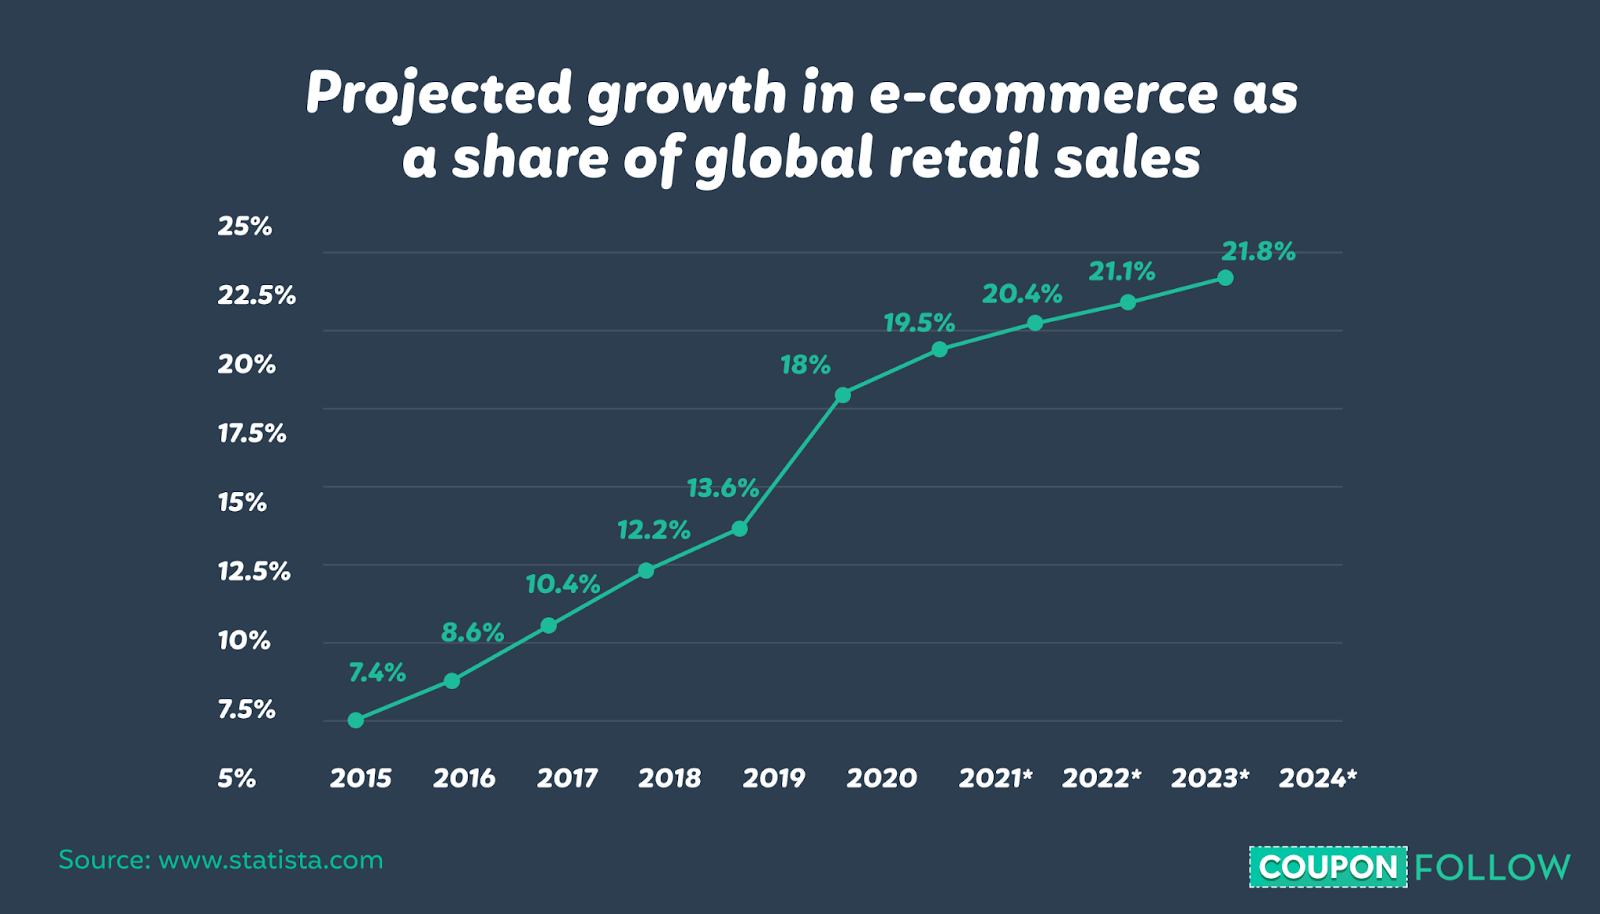 Ecommerce as share of retail